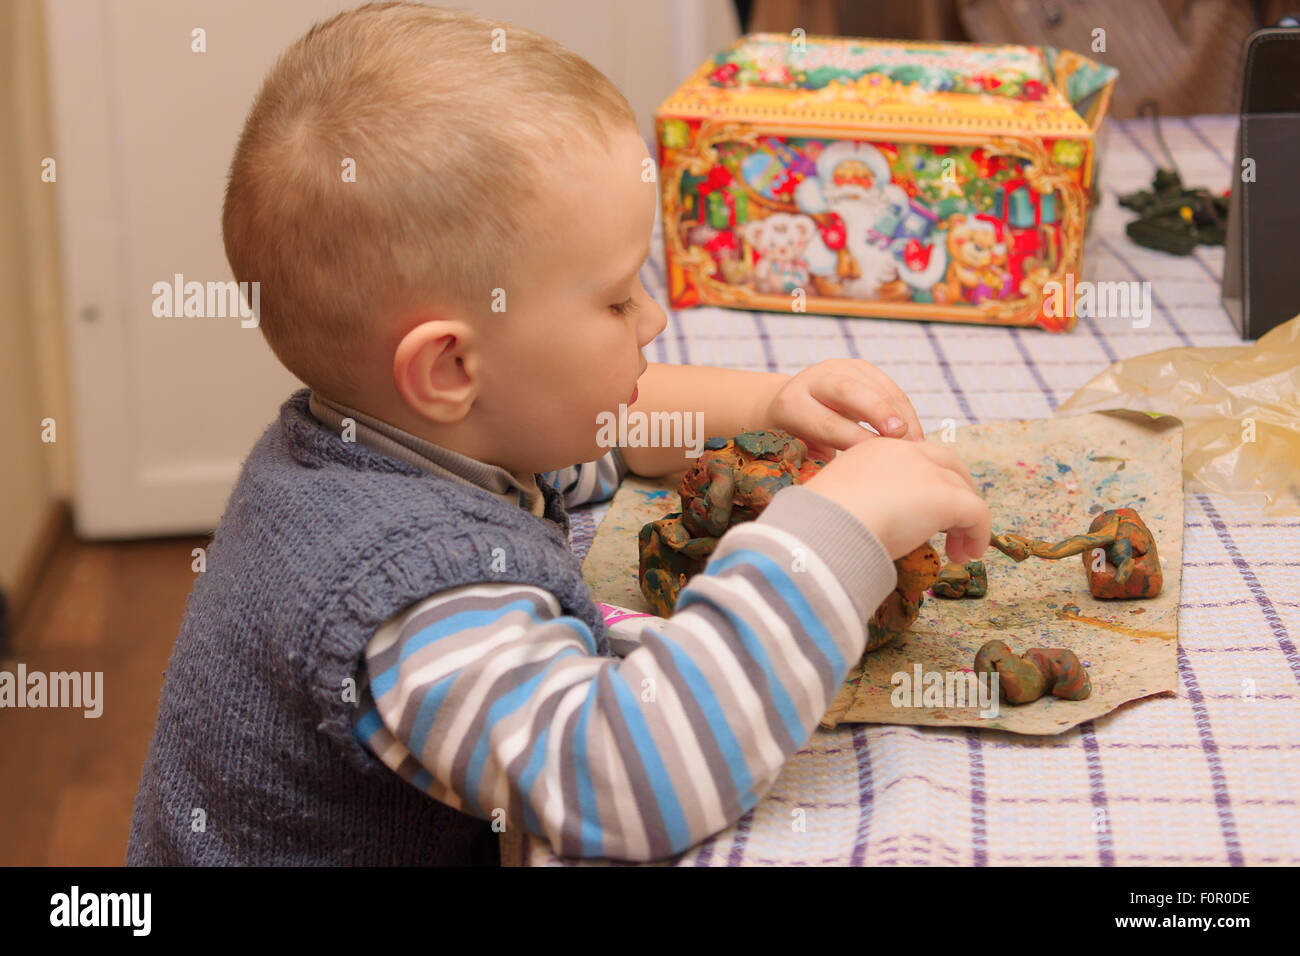 the little boy sits at a table and molds products from plasticine Stock Photo